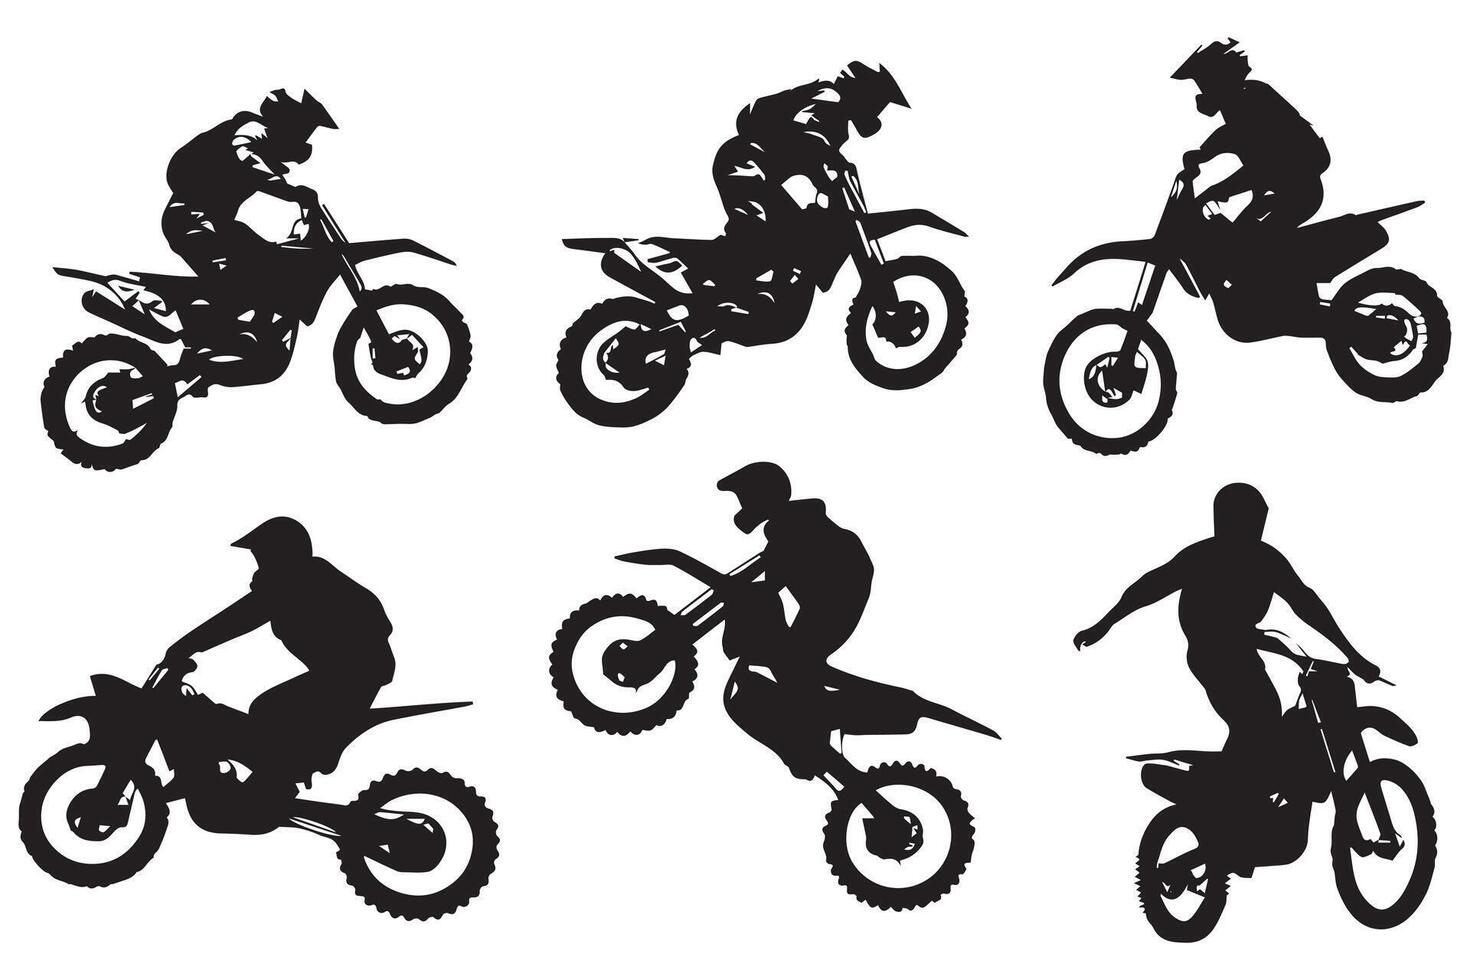 silhouette Motocross racing, motocross racer jumping on a motorcycle free vector